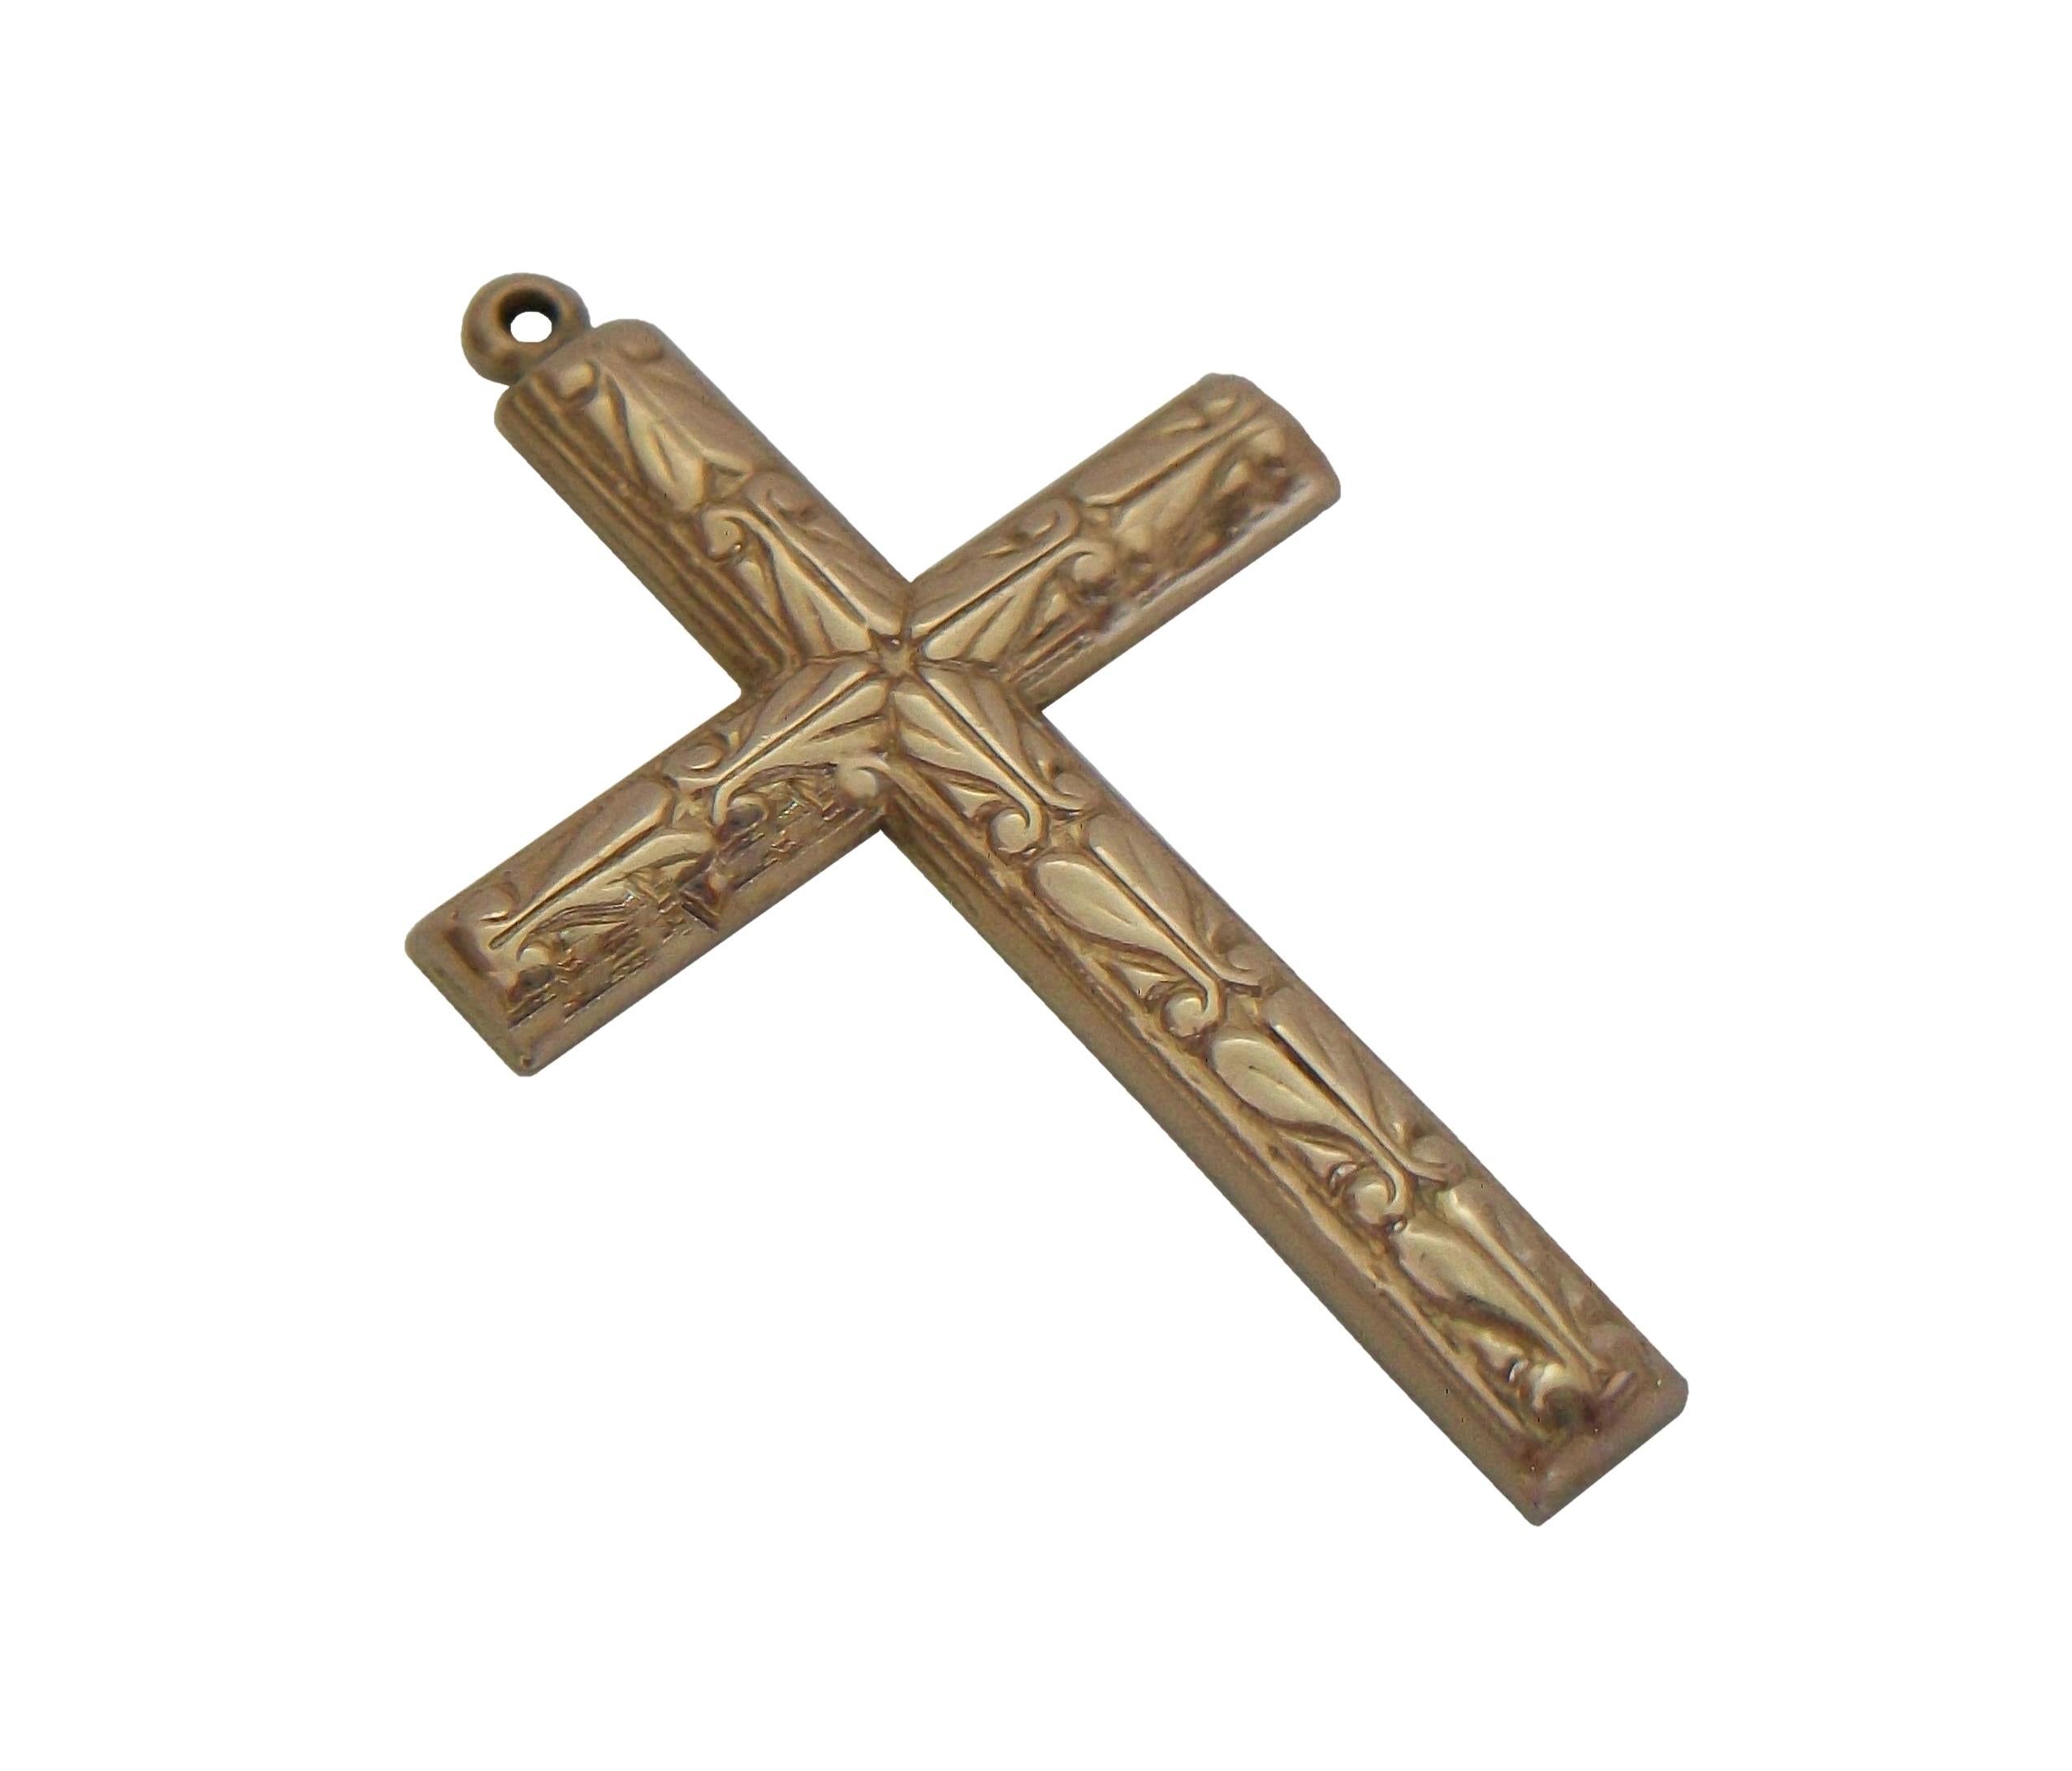 Antique Renaissance Revival 14K yellow gold cross pendant - featuring an embossed laurel leaf pattern over the convex arms of the cross - flat back - unsigned - acid tested for gold purity - Europe (likely Italy) - circa 1900.

Excellent antique